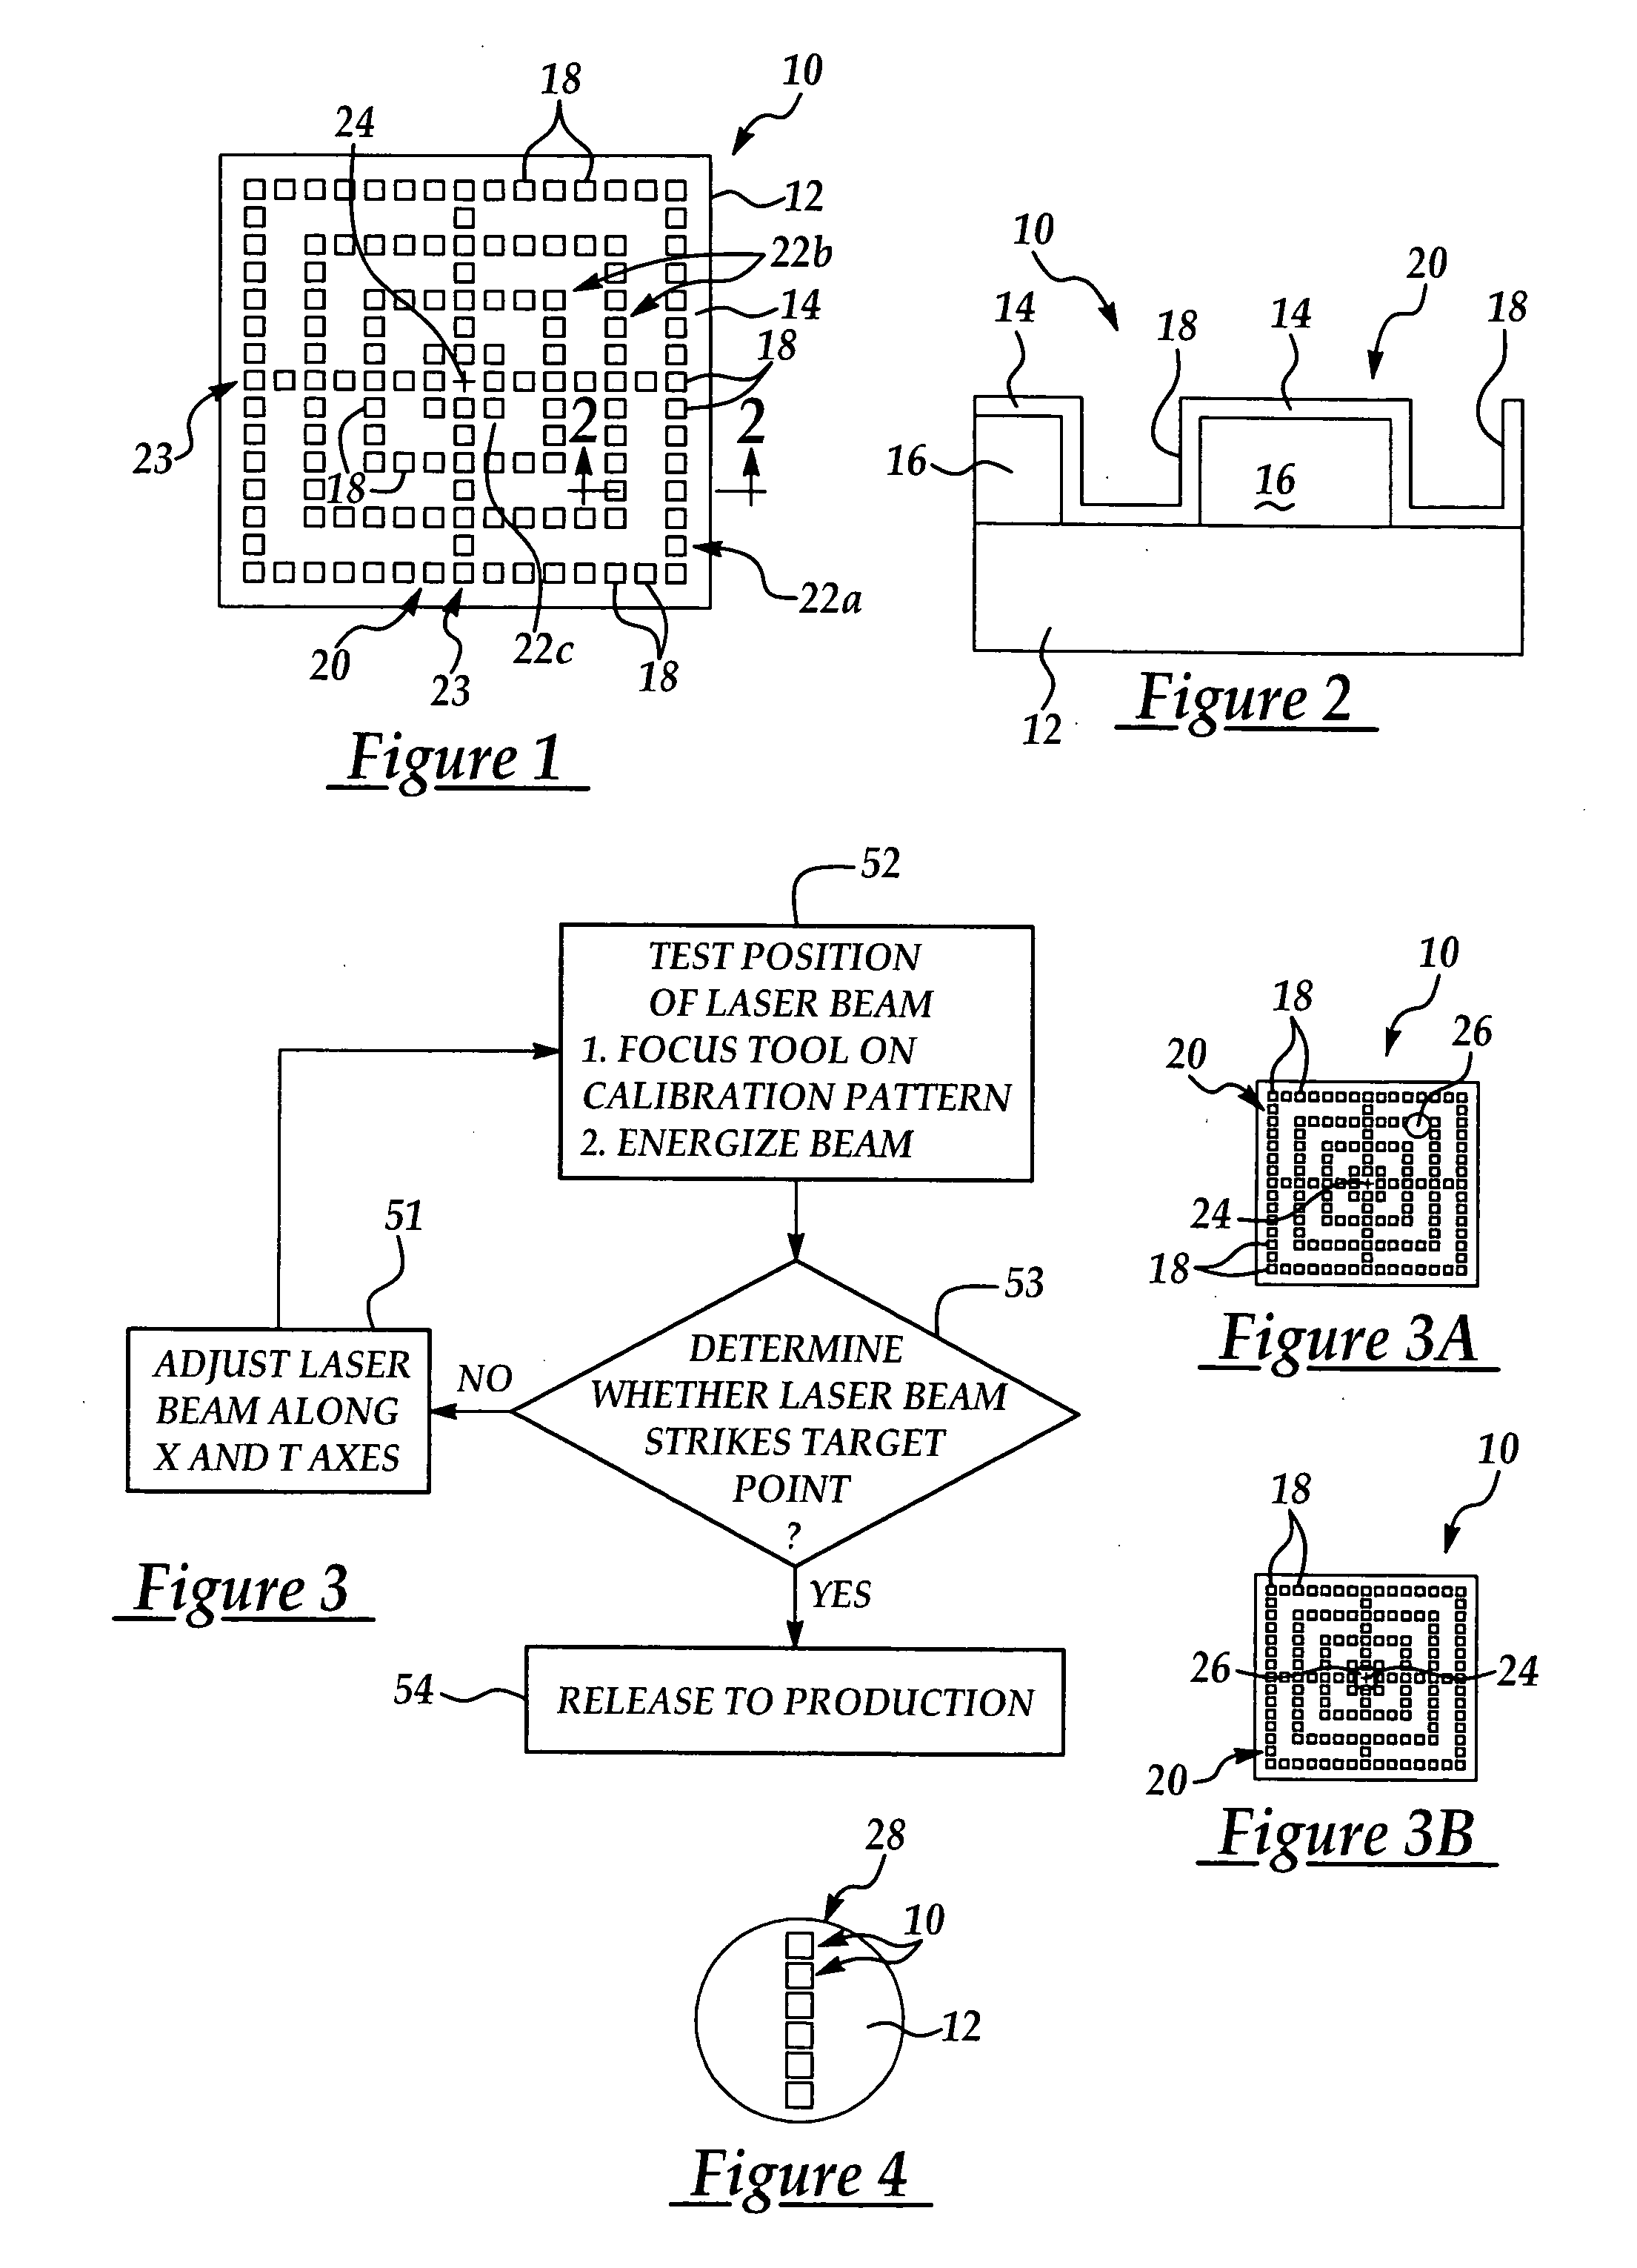 Test device and method for laser alignment calibration